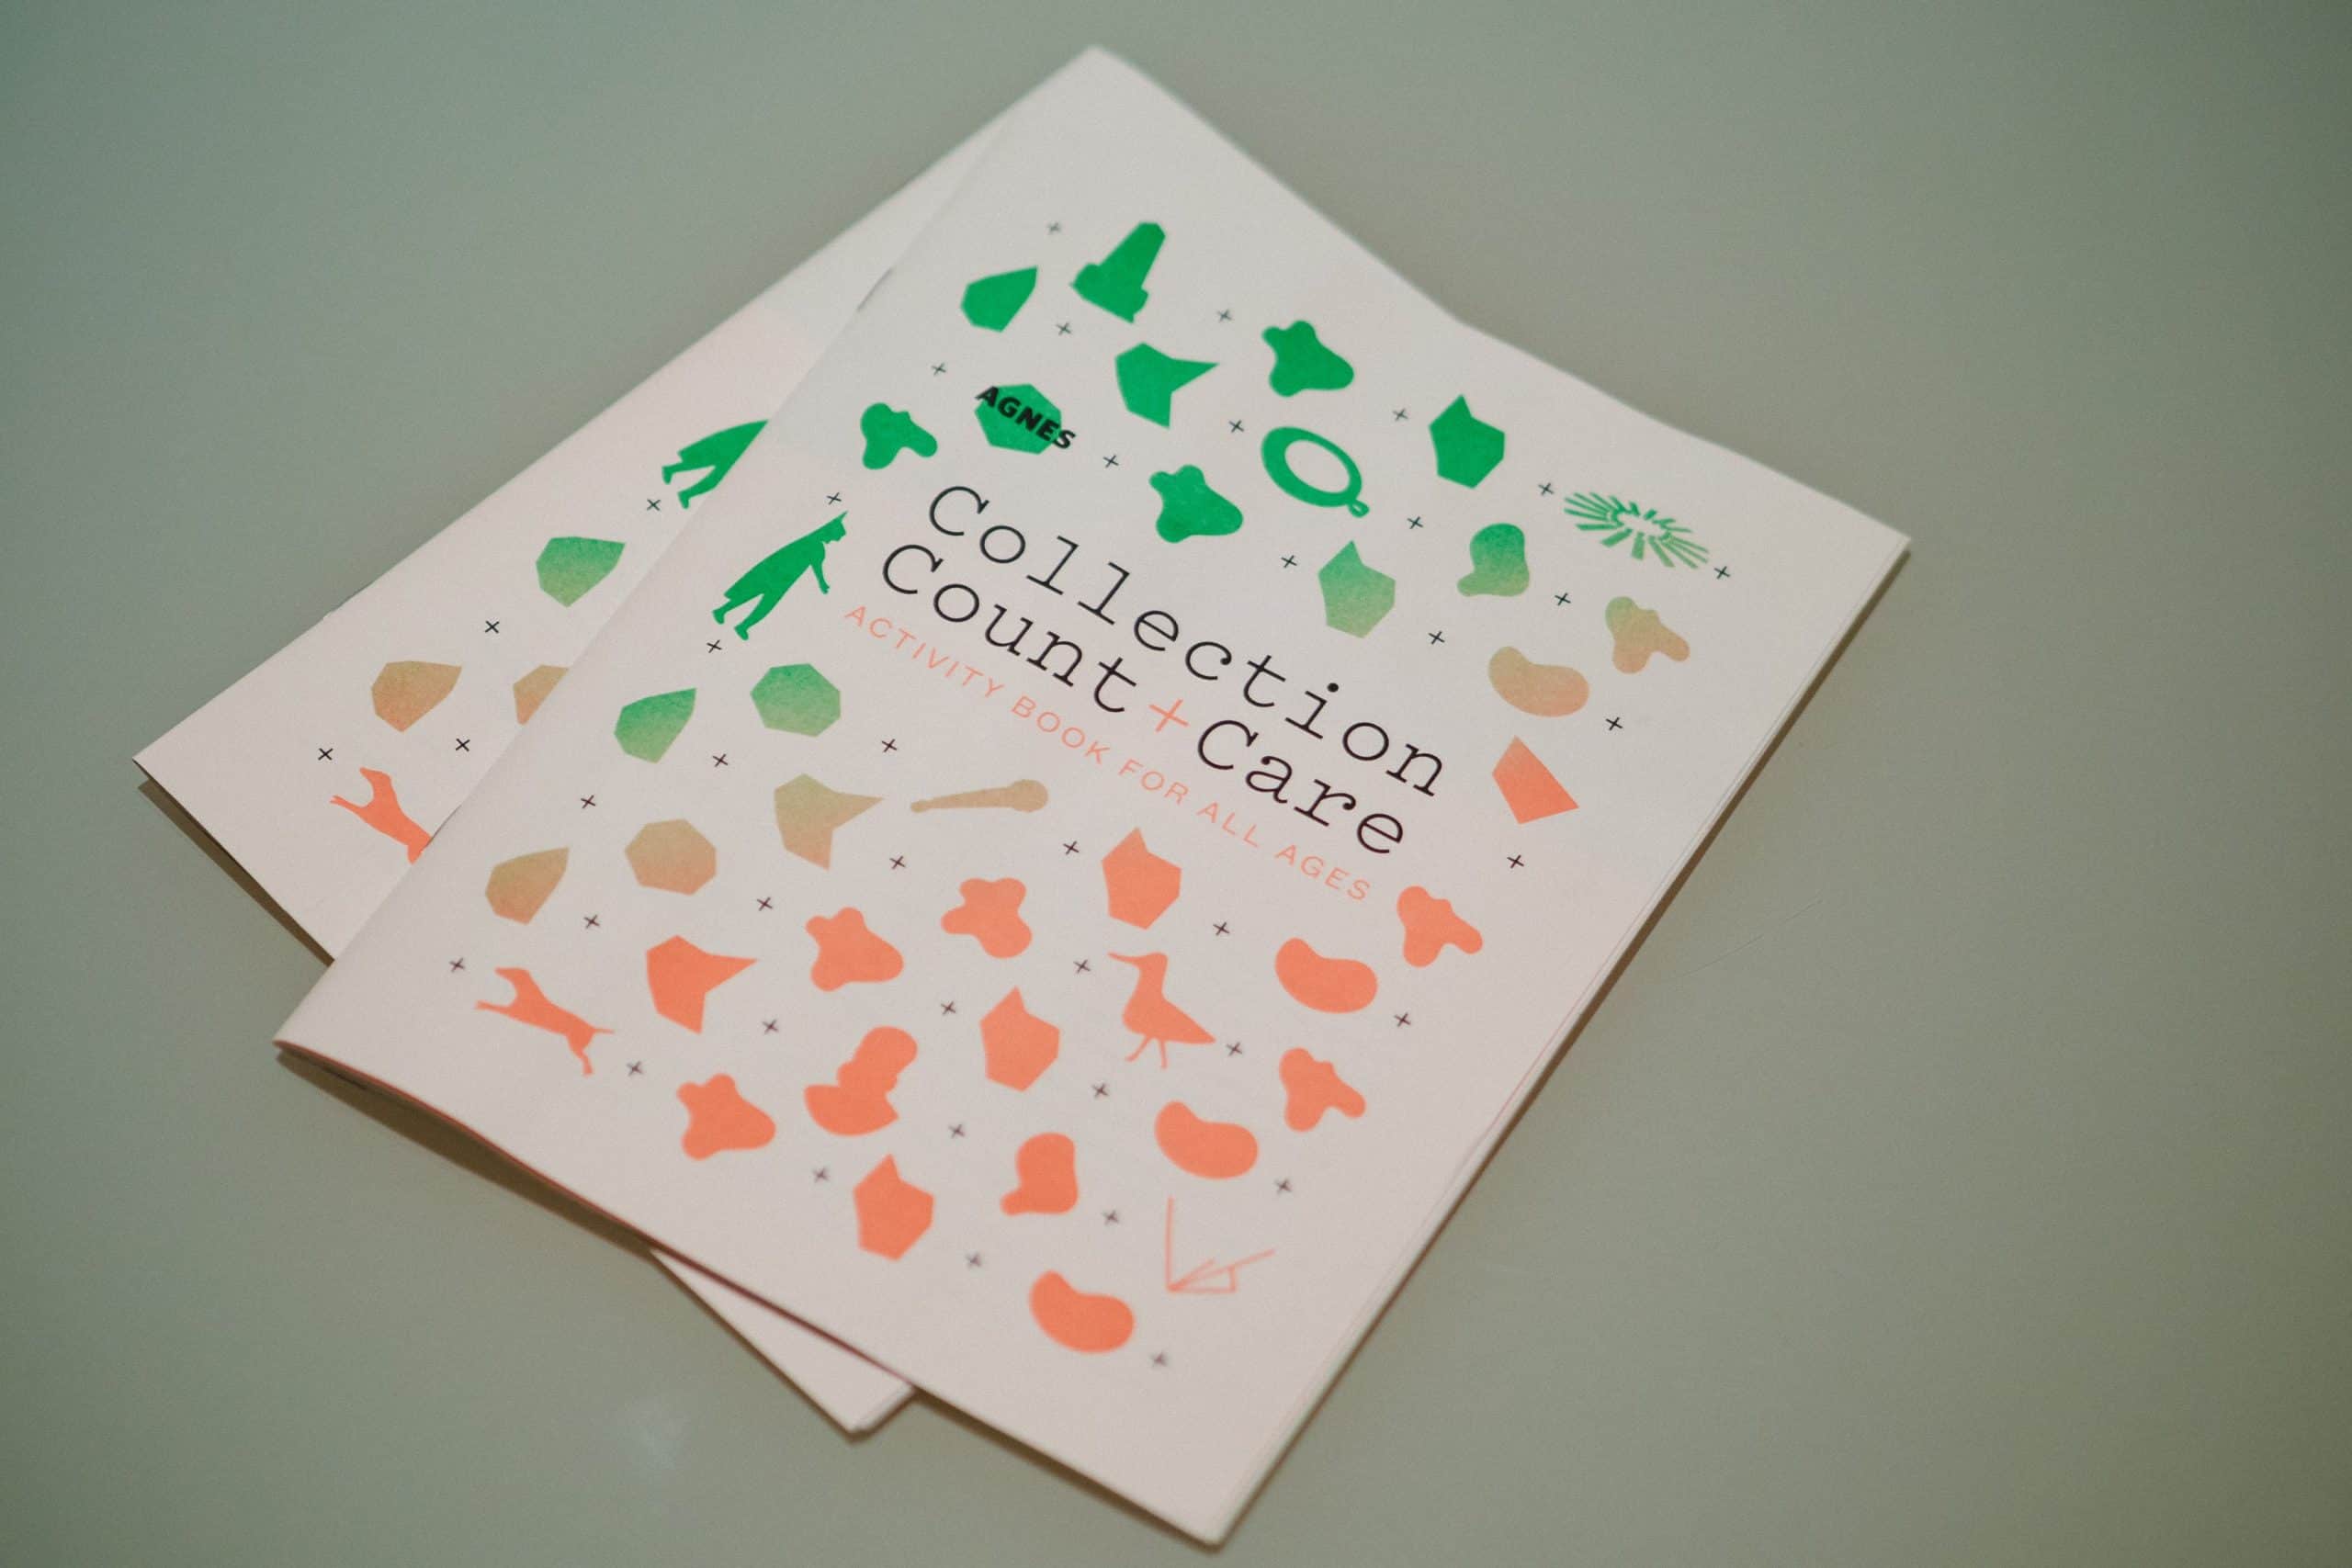 Collection Count + Care Activity Book. Photo: Tim Forbes